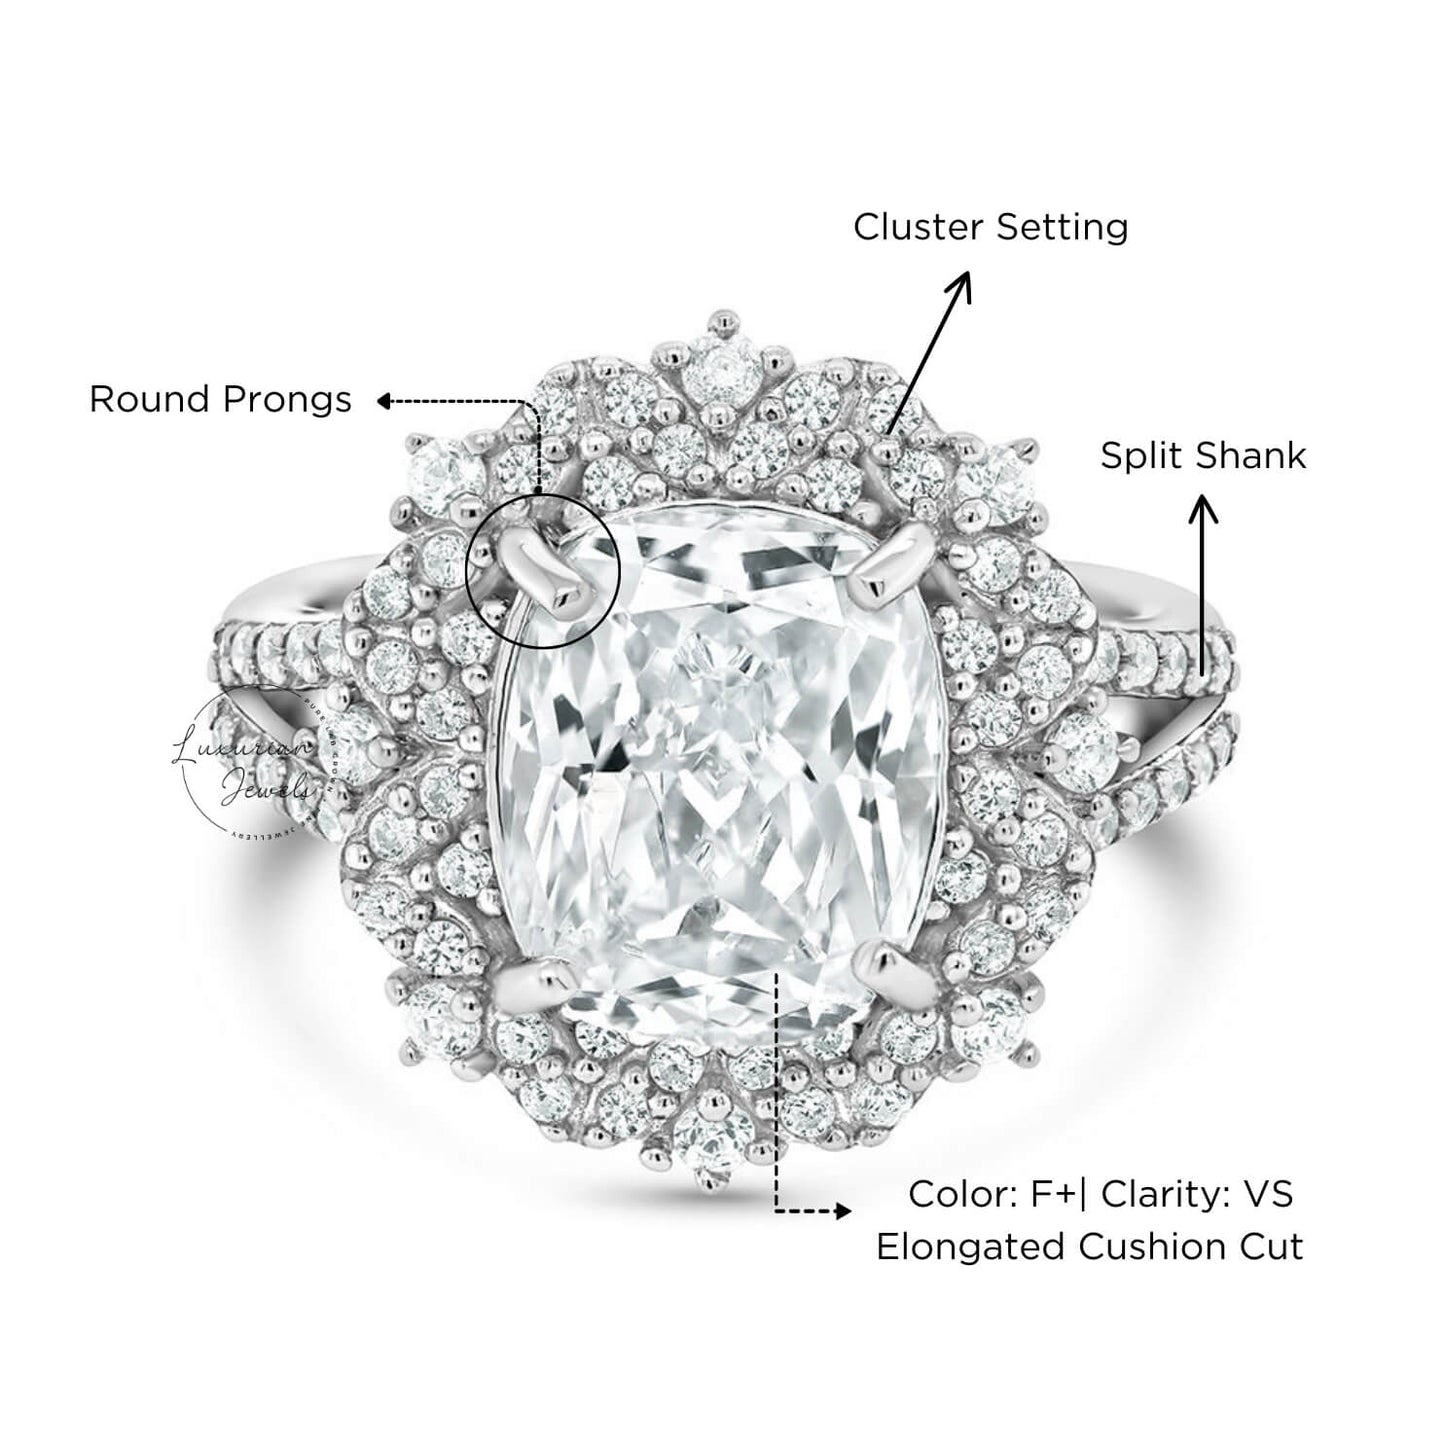 1.50 To 2.00 CT Elongated Cushion Cut Cluster Vintage Diamond Ring